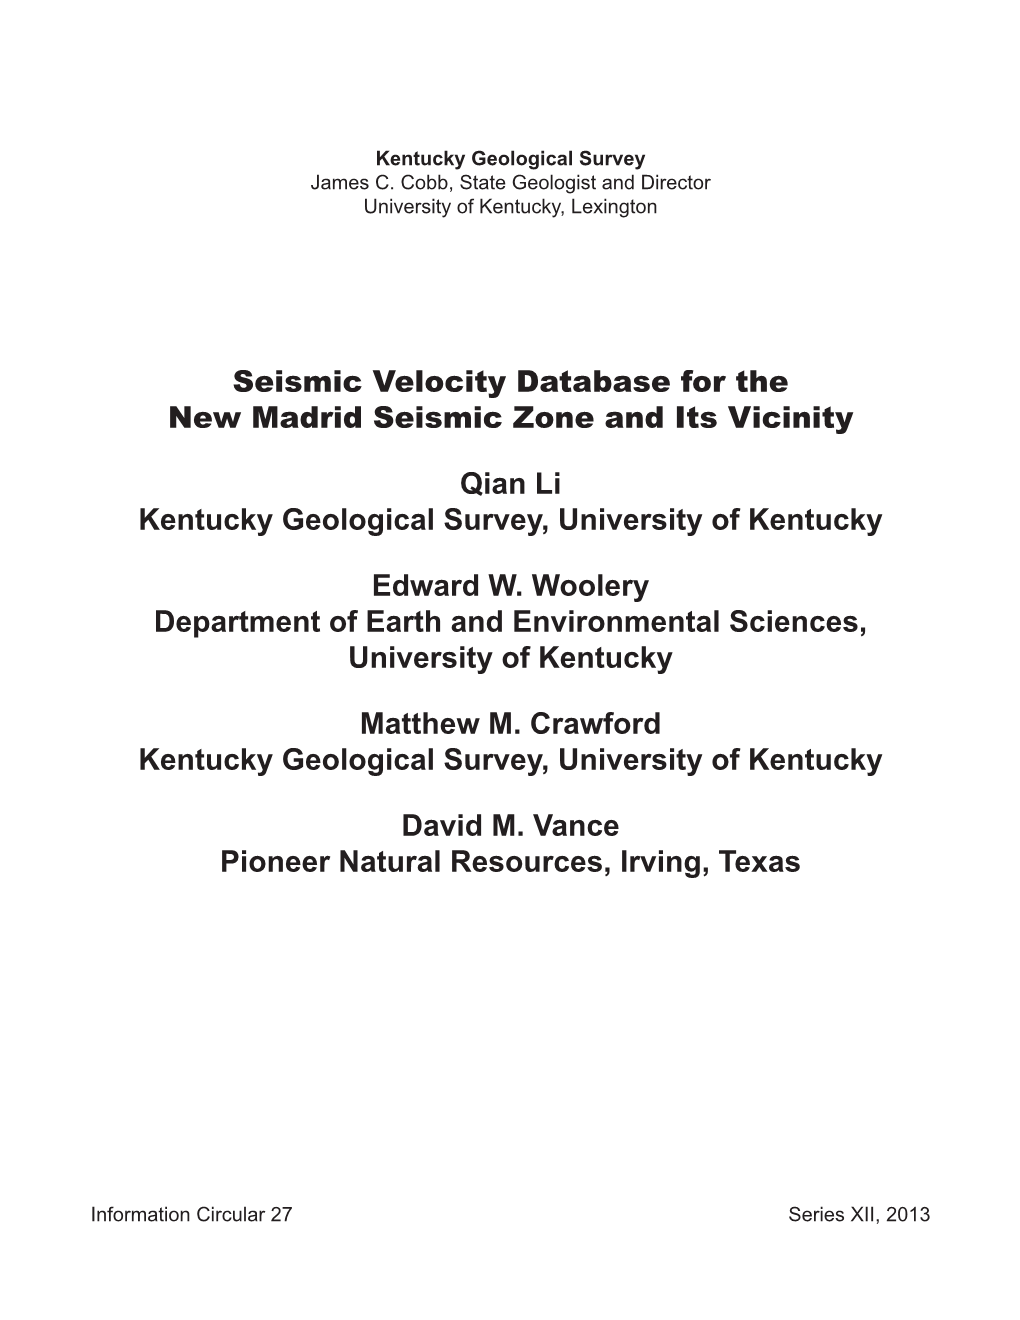 Seismic Velocity Database for the New Madrid Seismic Zone and Its Vicinity